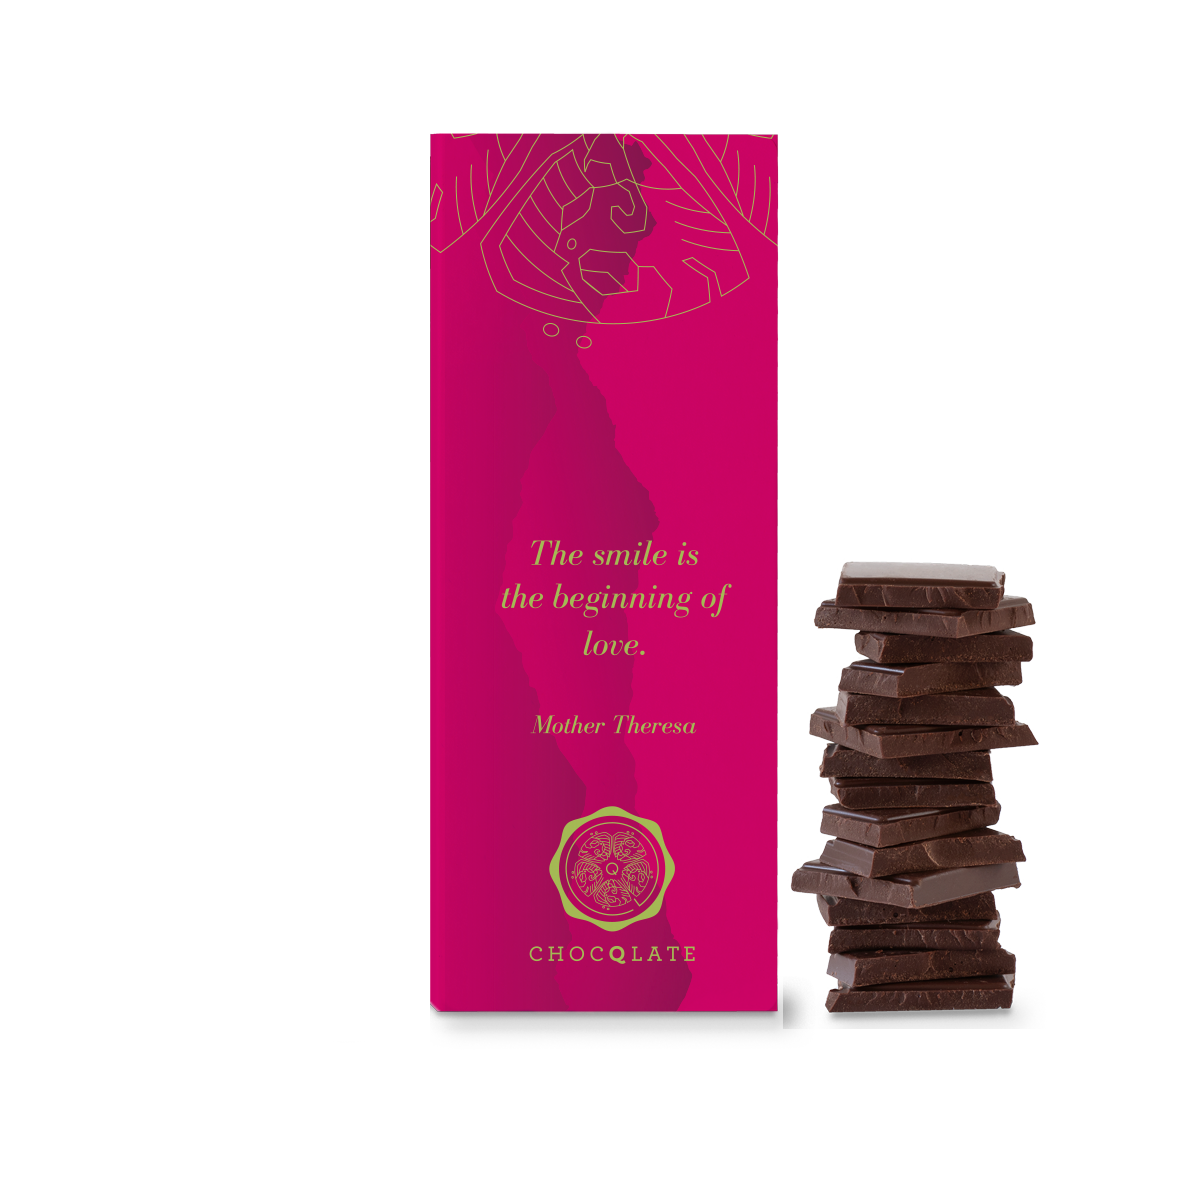 "The smile is the beginning of love" CHOCQLATE organic chocolate 50% cacao